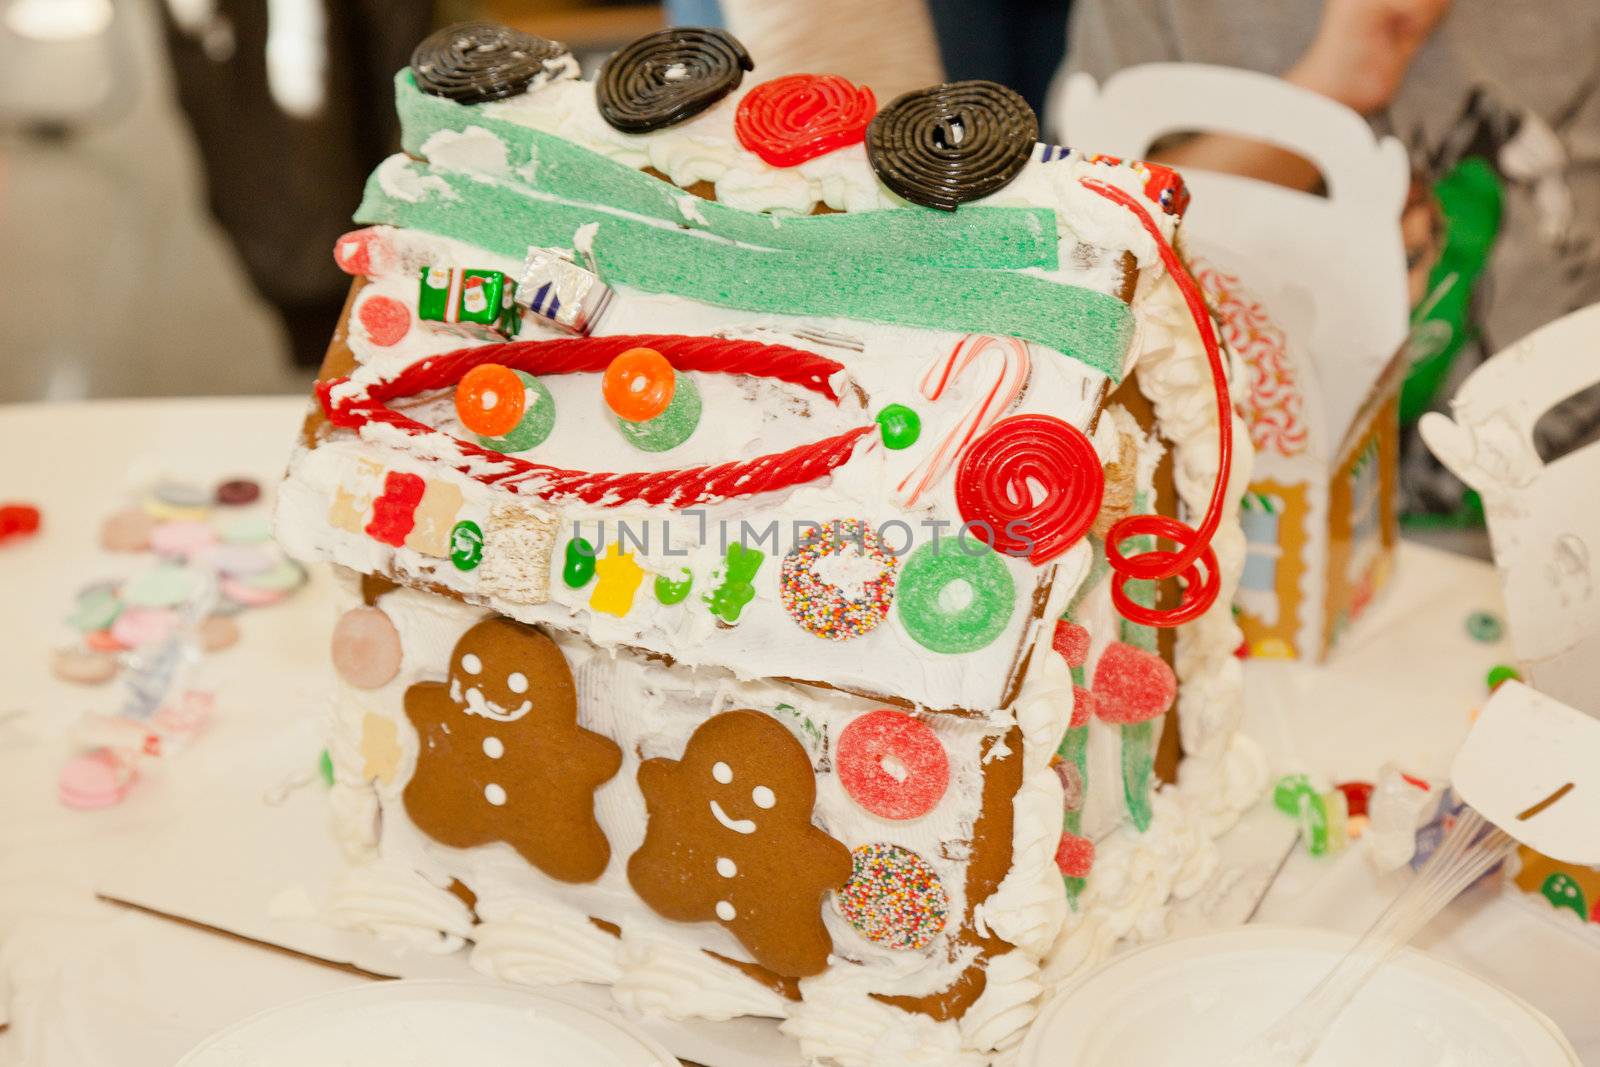 Gingerbread dough is used to build gingerbread houses similar to the "witch's house" encountered by Hansel and Gretel.